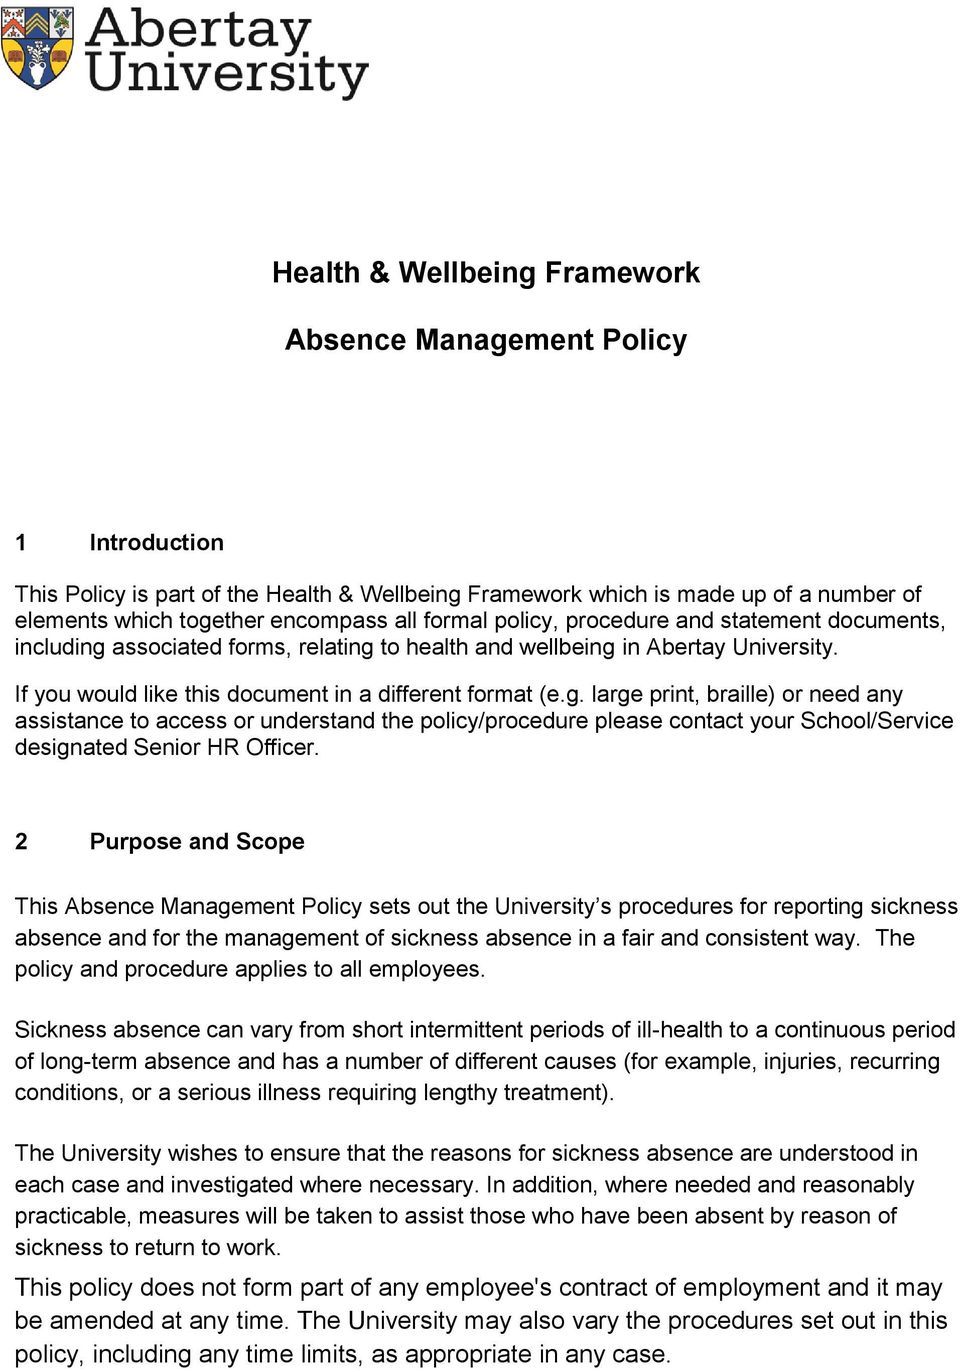 associated forms, relating to health and wellbeing in Abertay University. If you would like this document in a different format (e.g. large print, braille) or need any assistance to access or understand the policy/procedure please contact your School/Service designated Senior HR Officer.